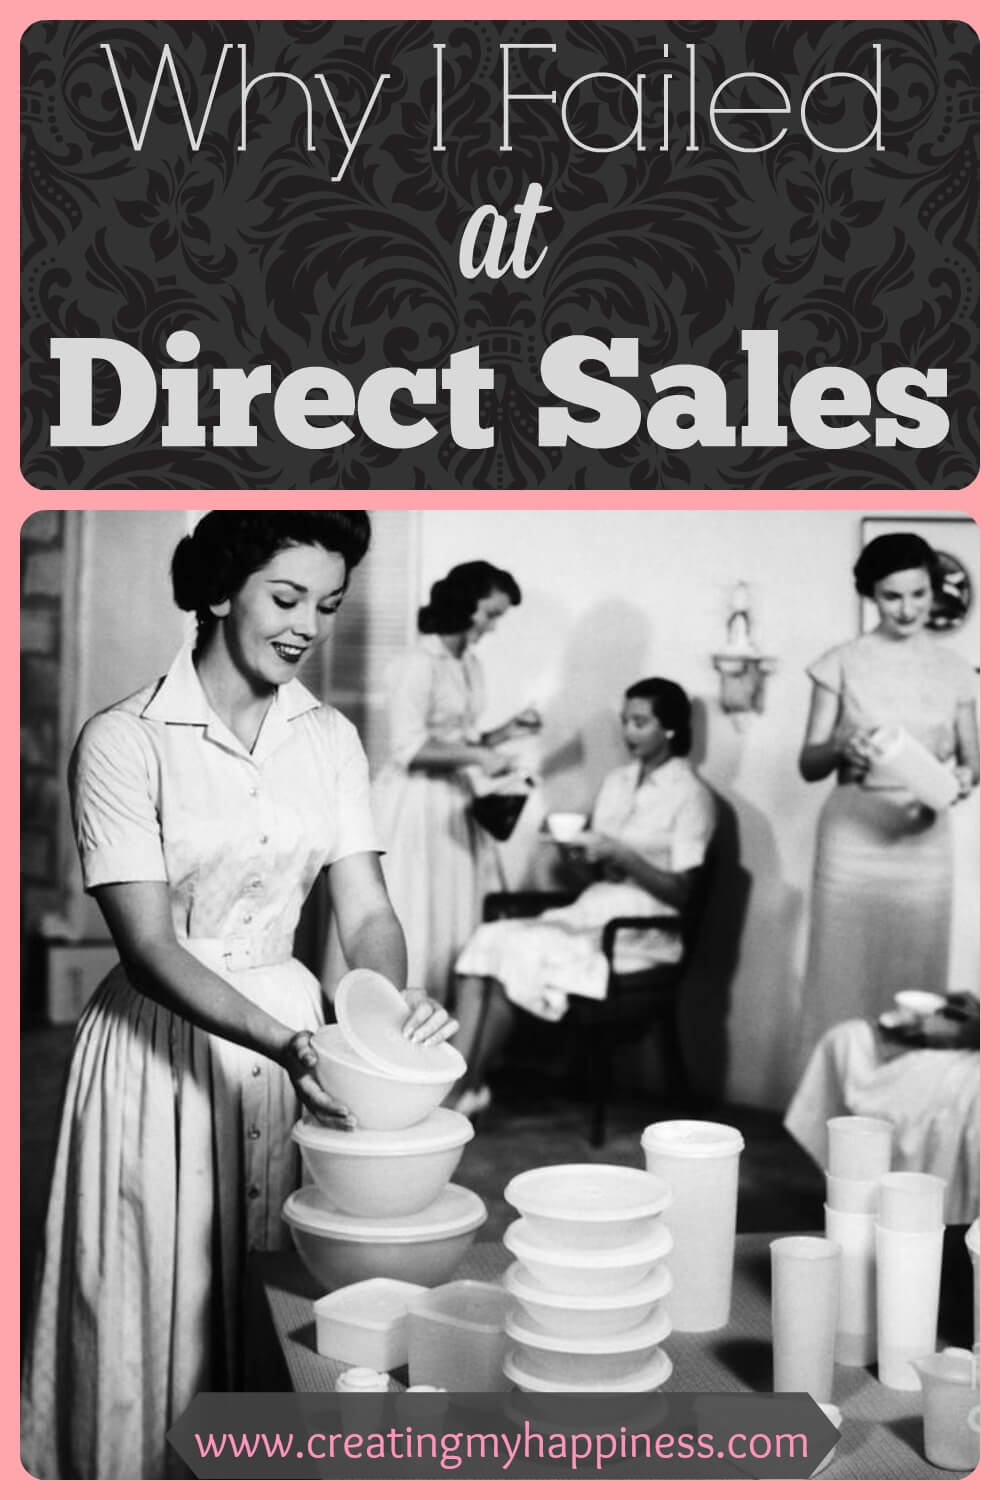 We all know someone who wants us to join the latest direct sales company. Read about these common pitfalls and be prepared for how the game is played.